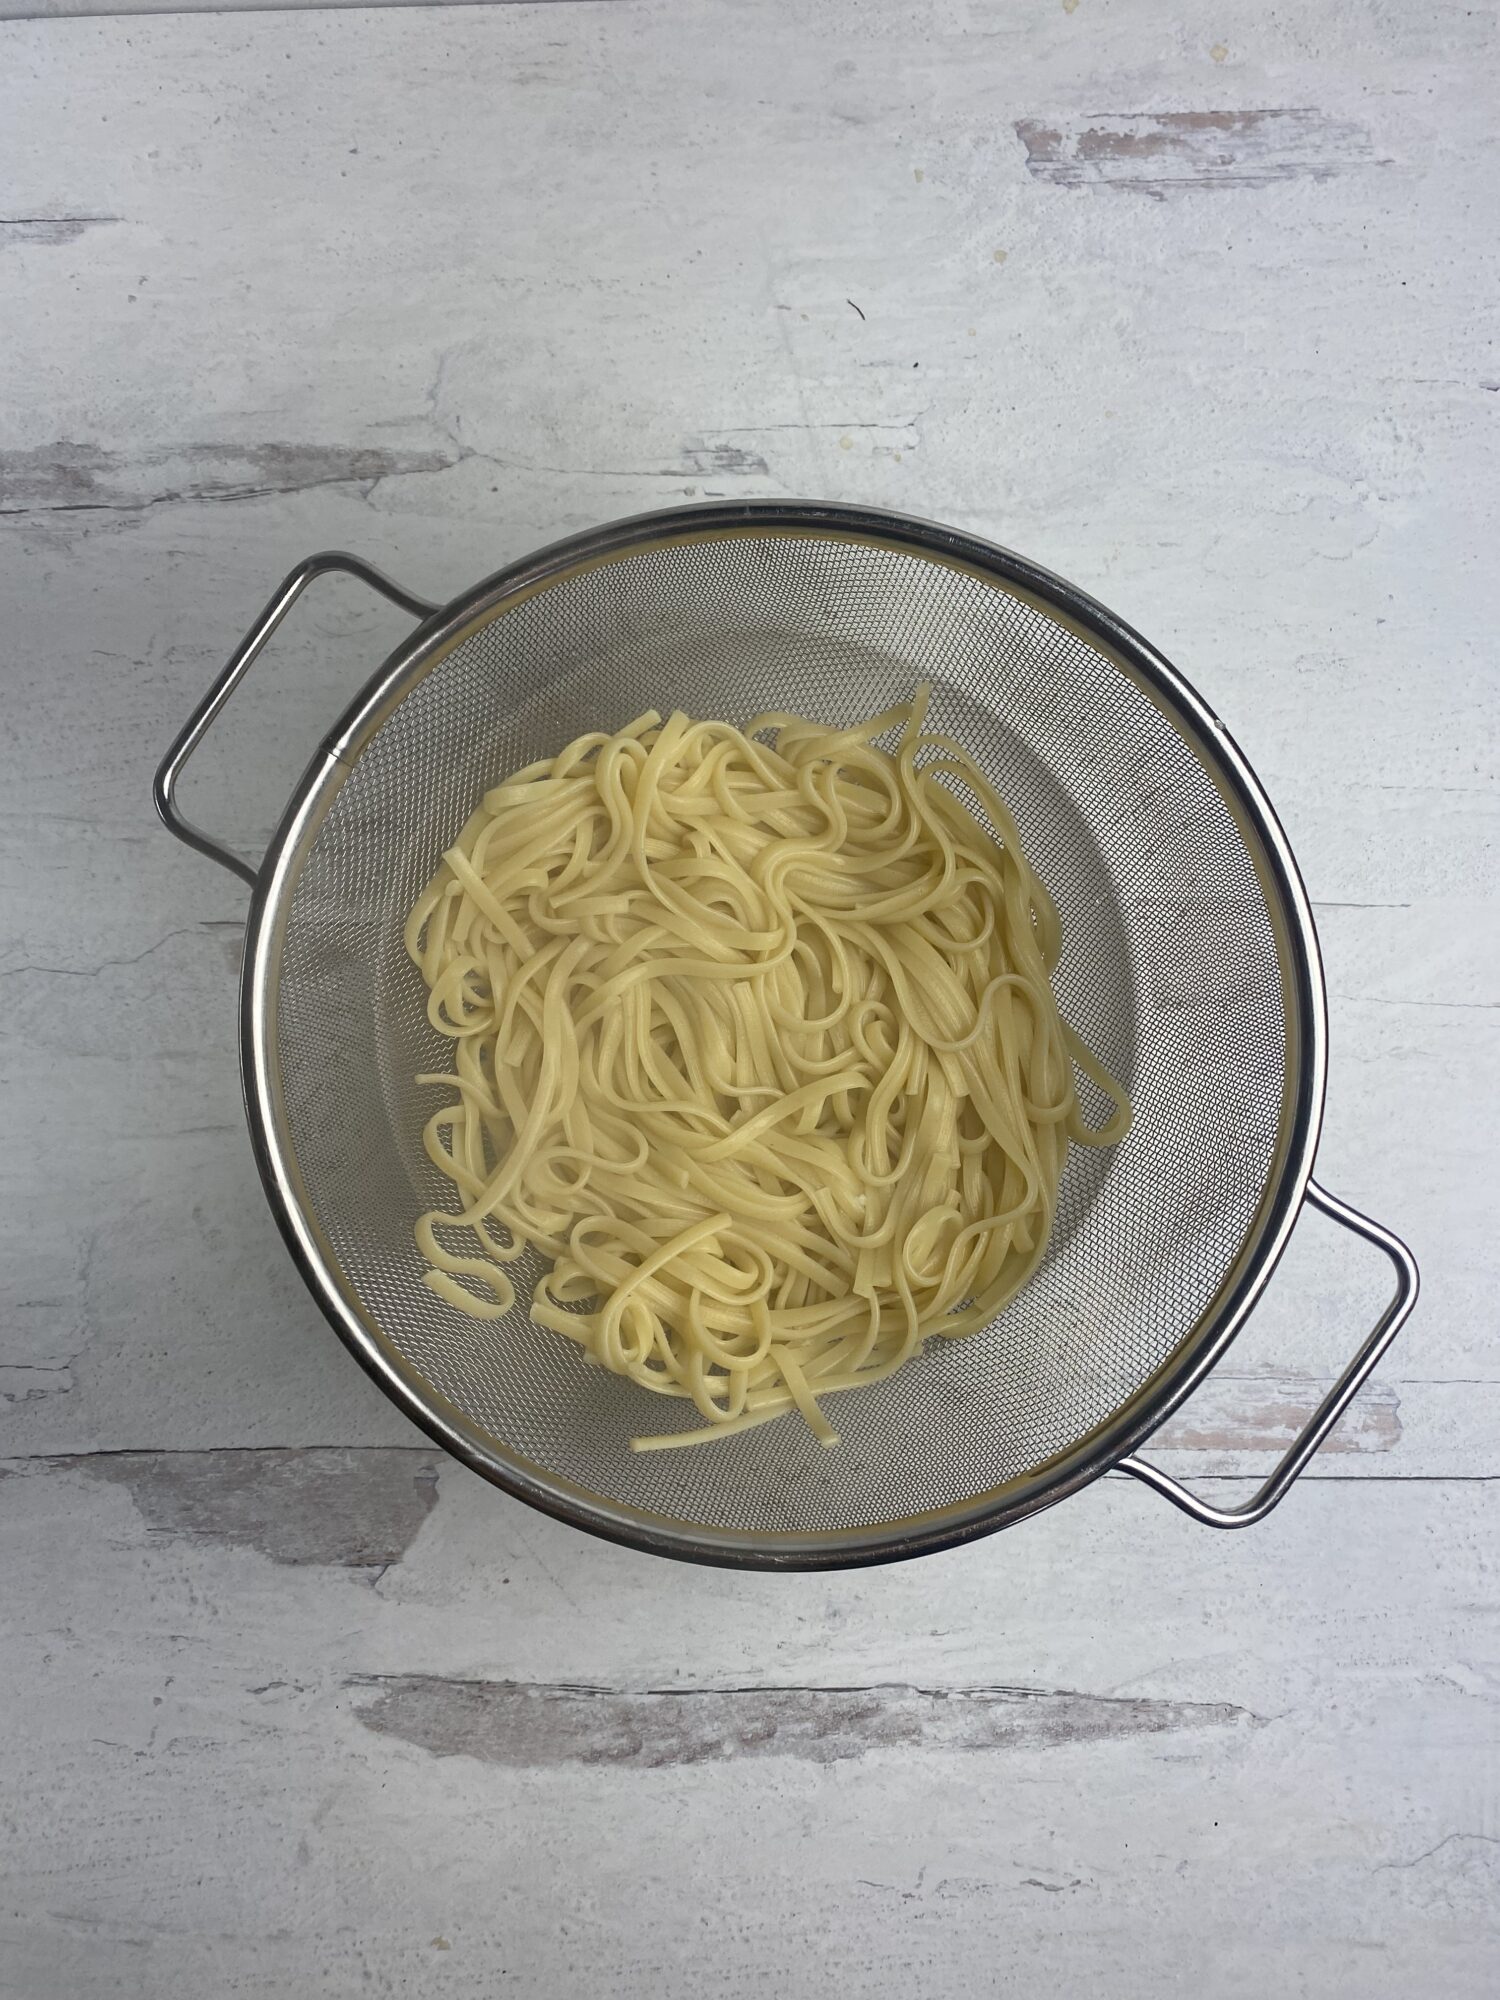 Cooked pasta draining in a metal colander.